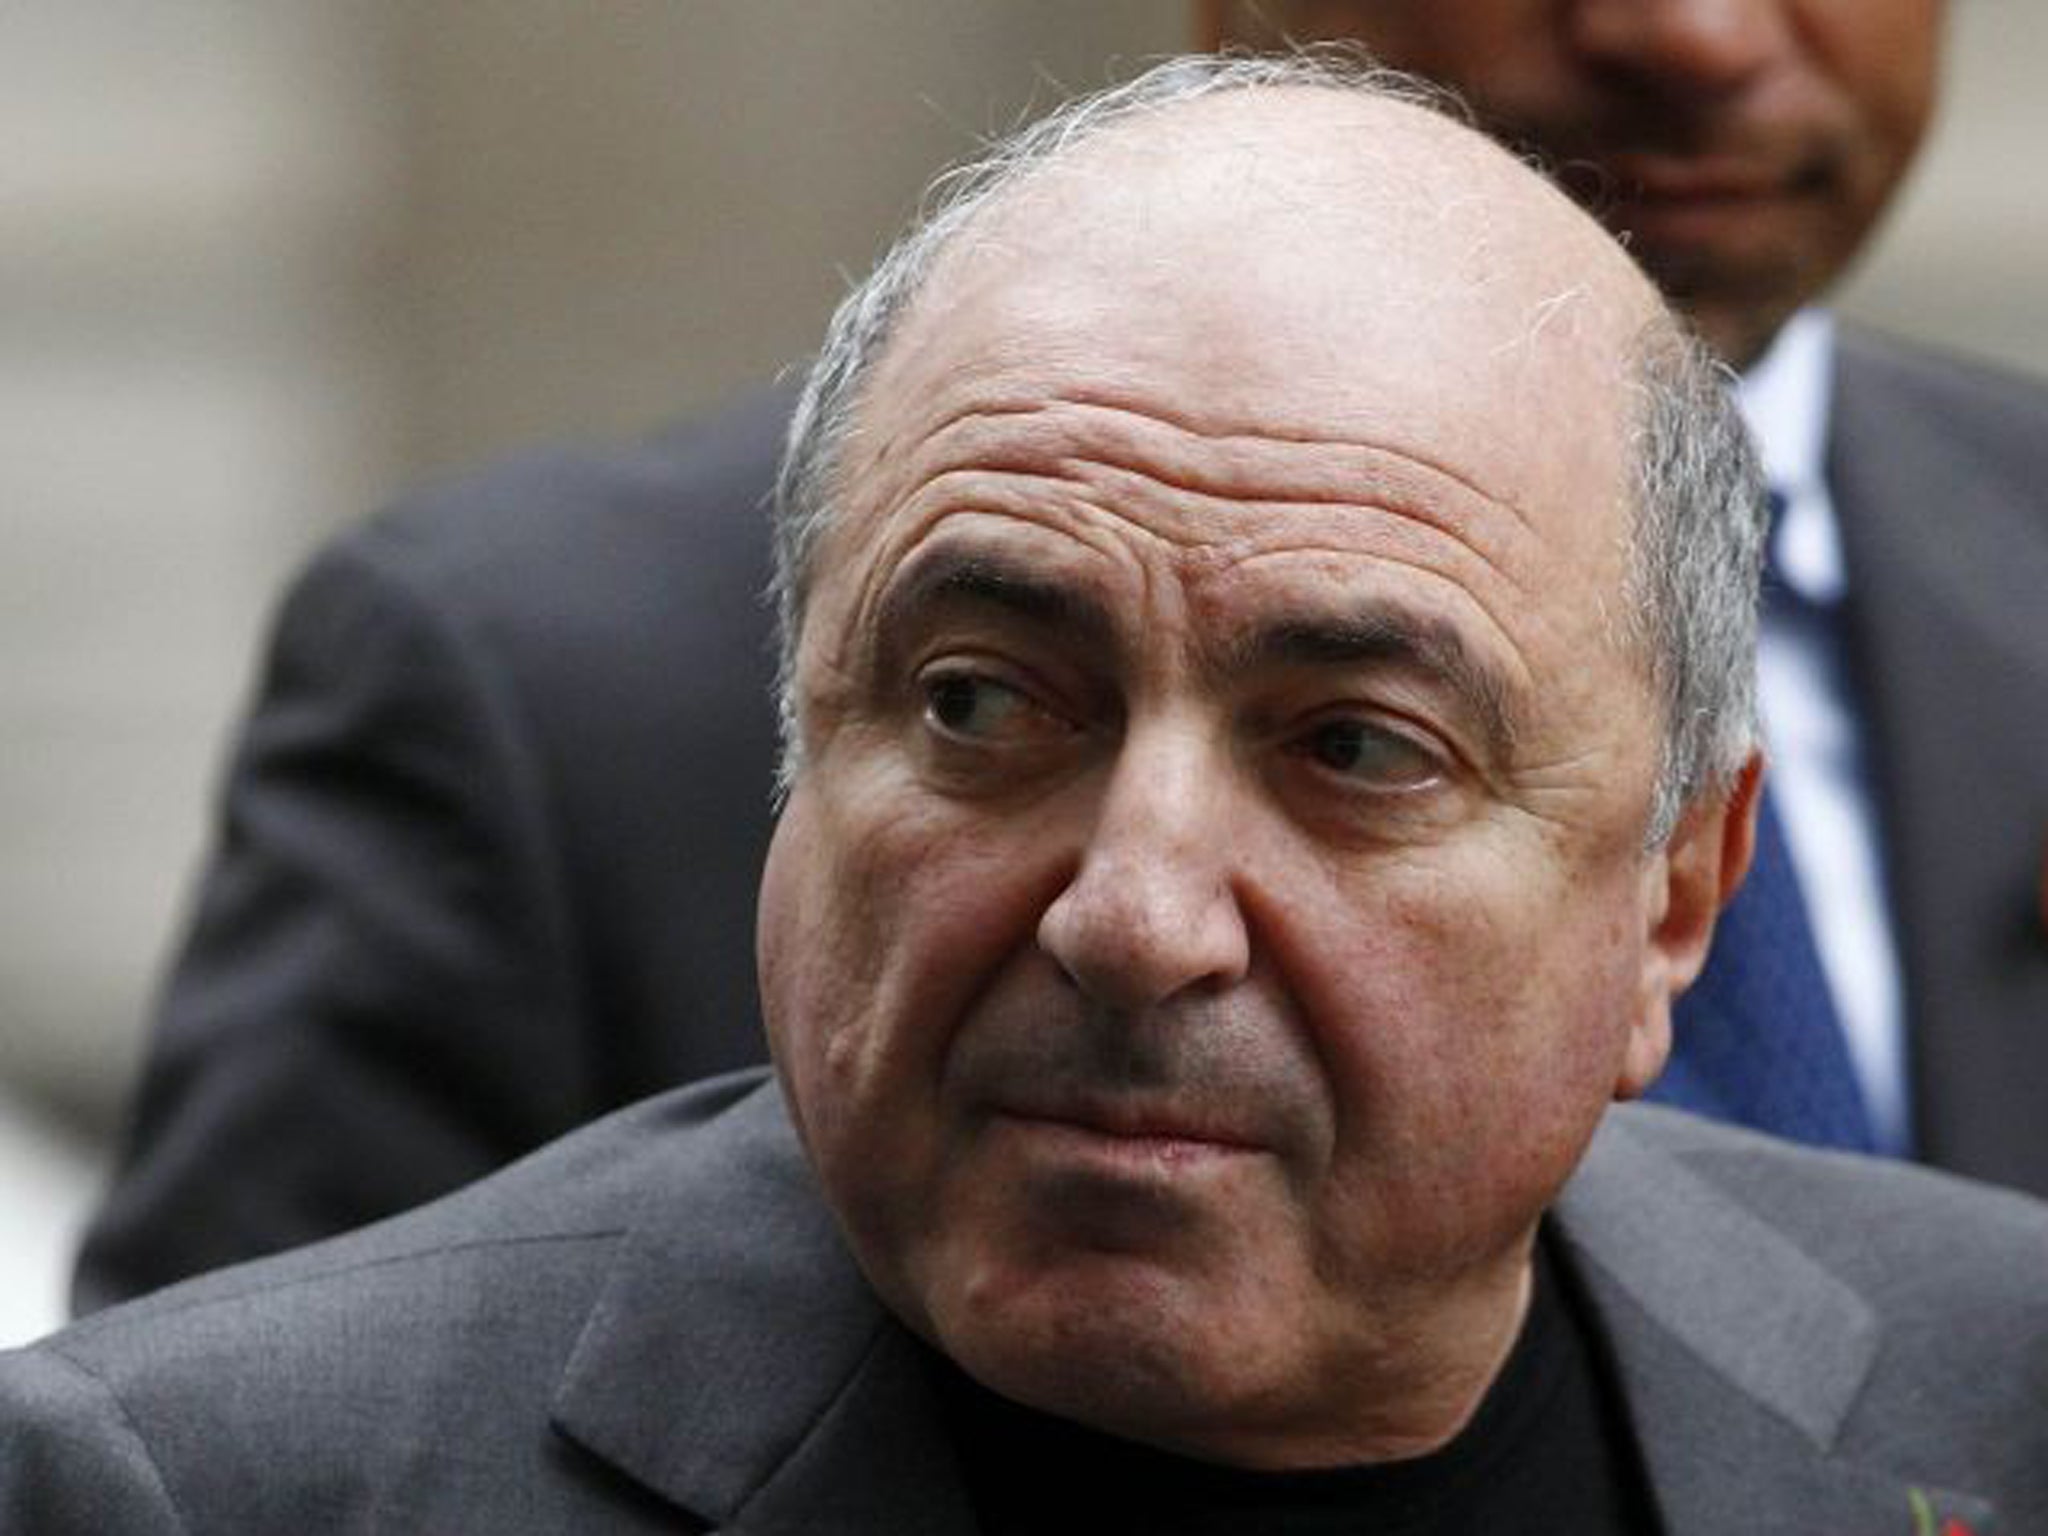 Boris Berezovsky died after spending his life standing up for justice in a 'corrupt world', his daughter claimed